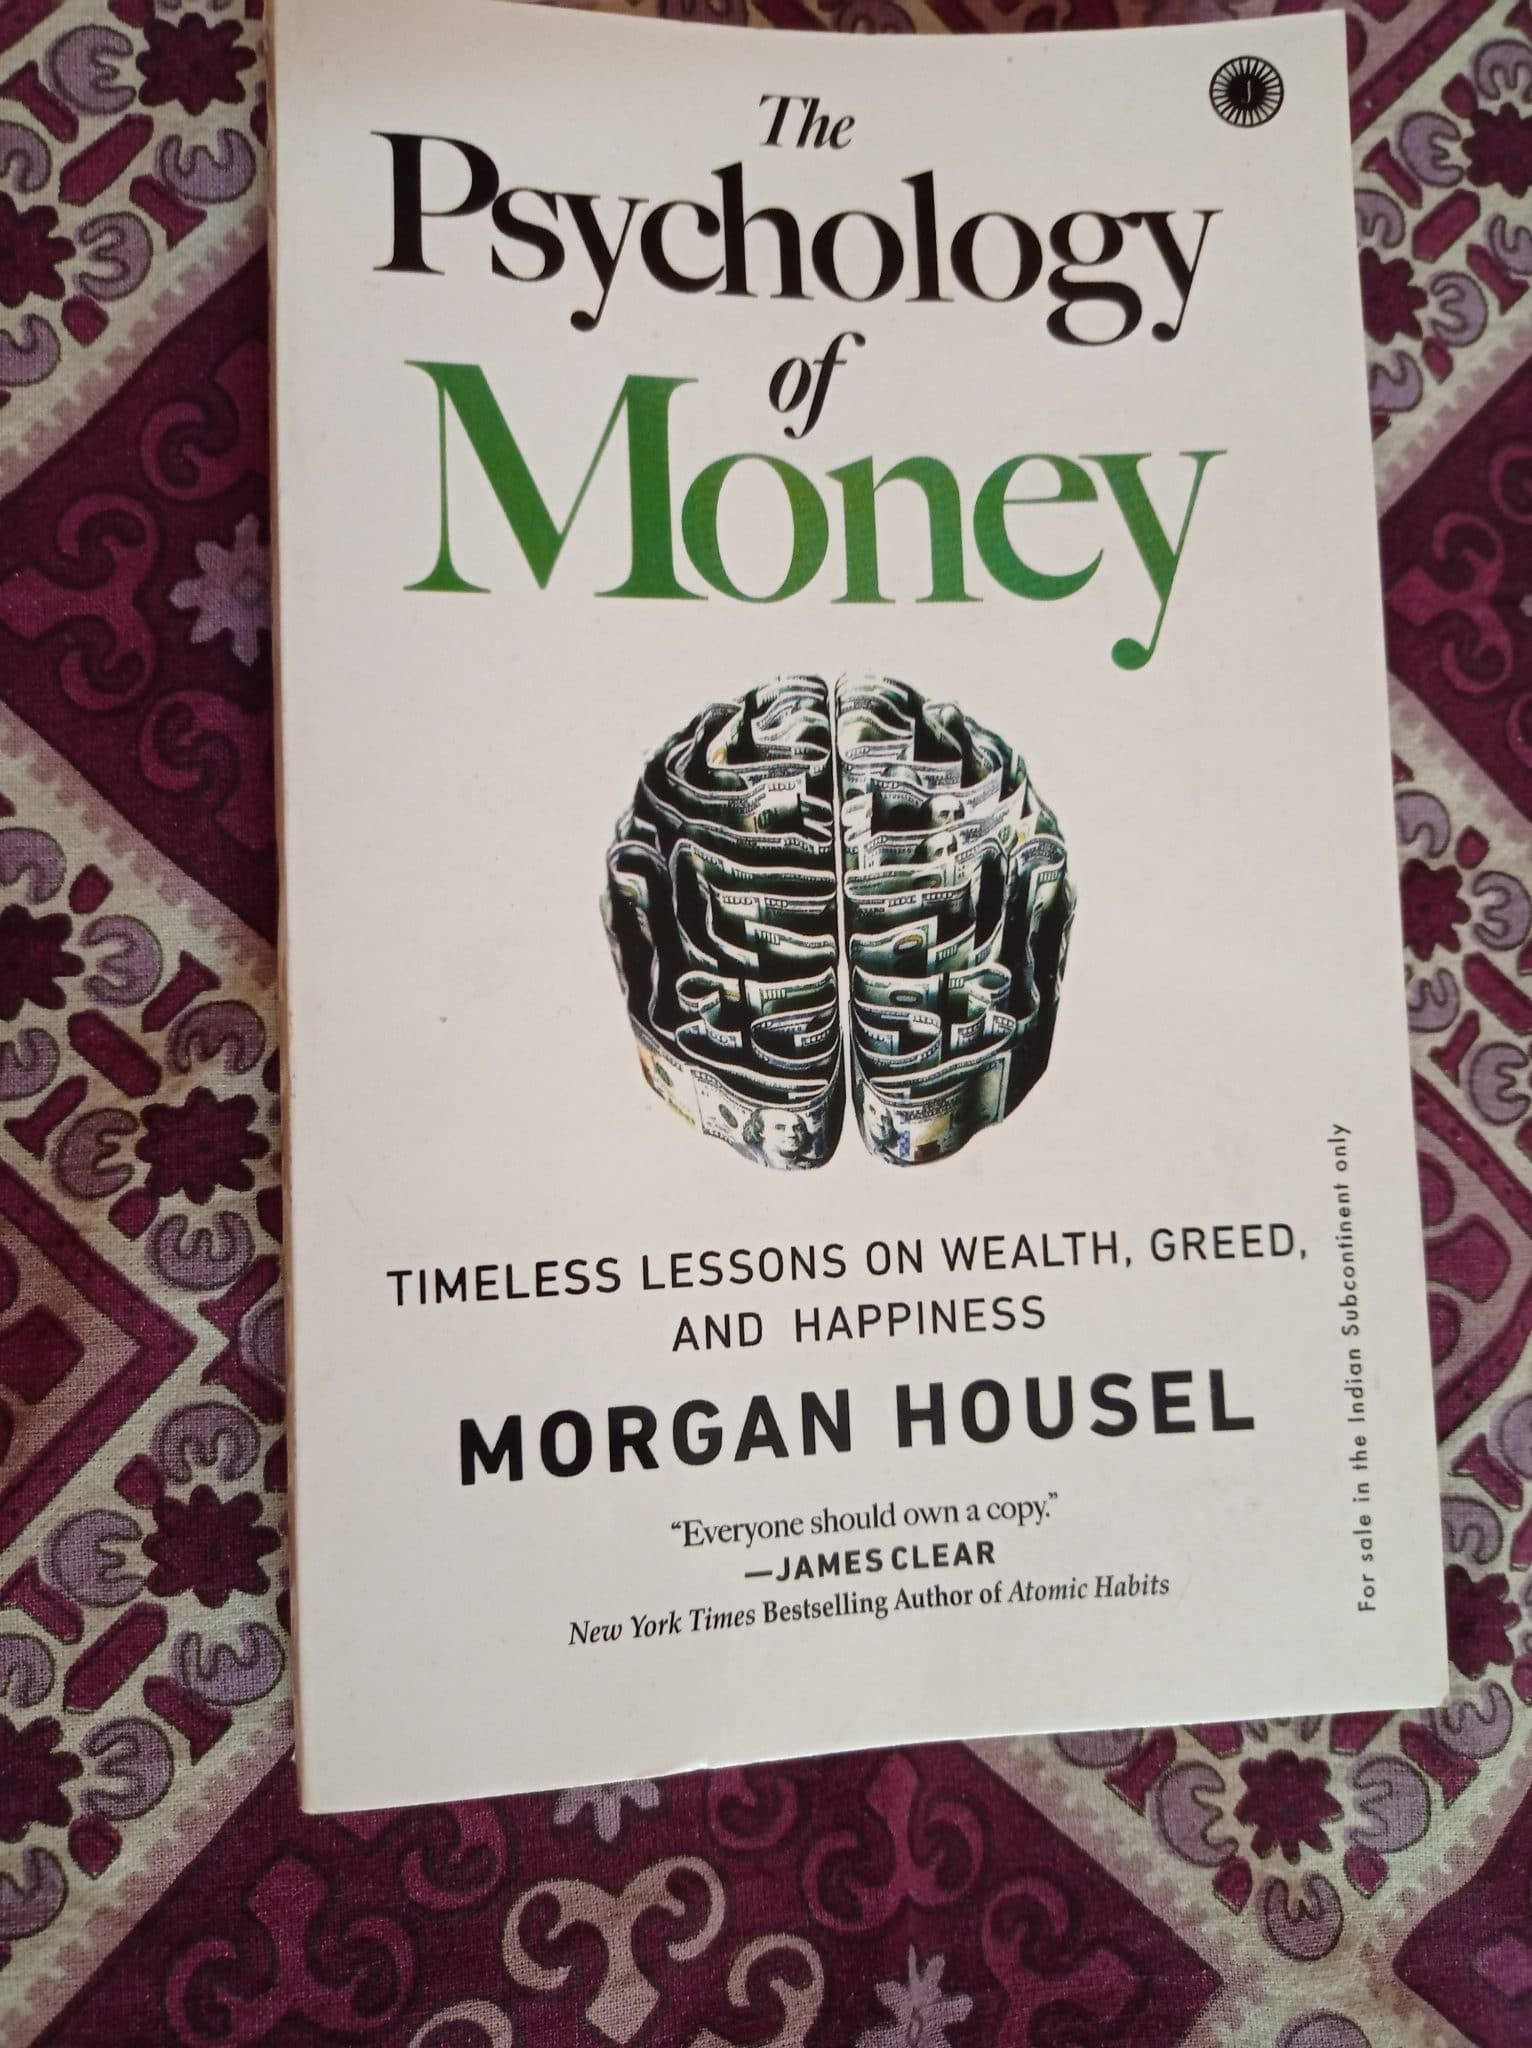 The Psychology Of Money in Philosophy 